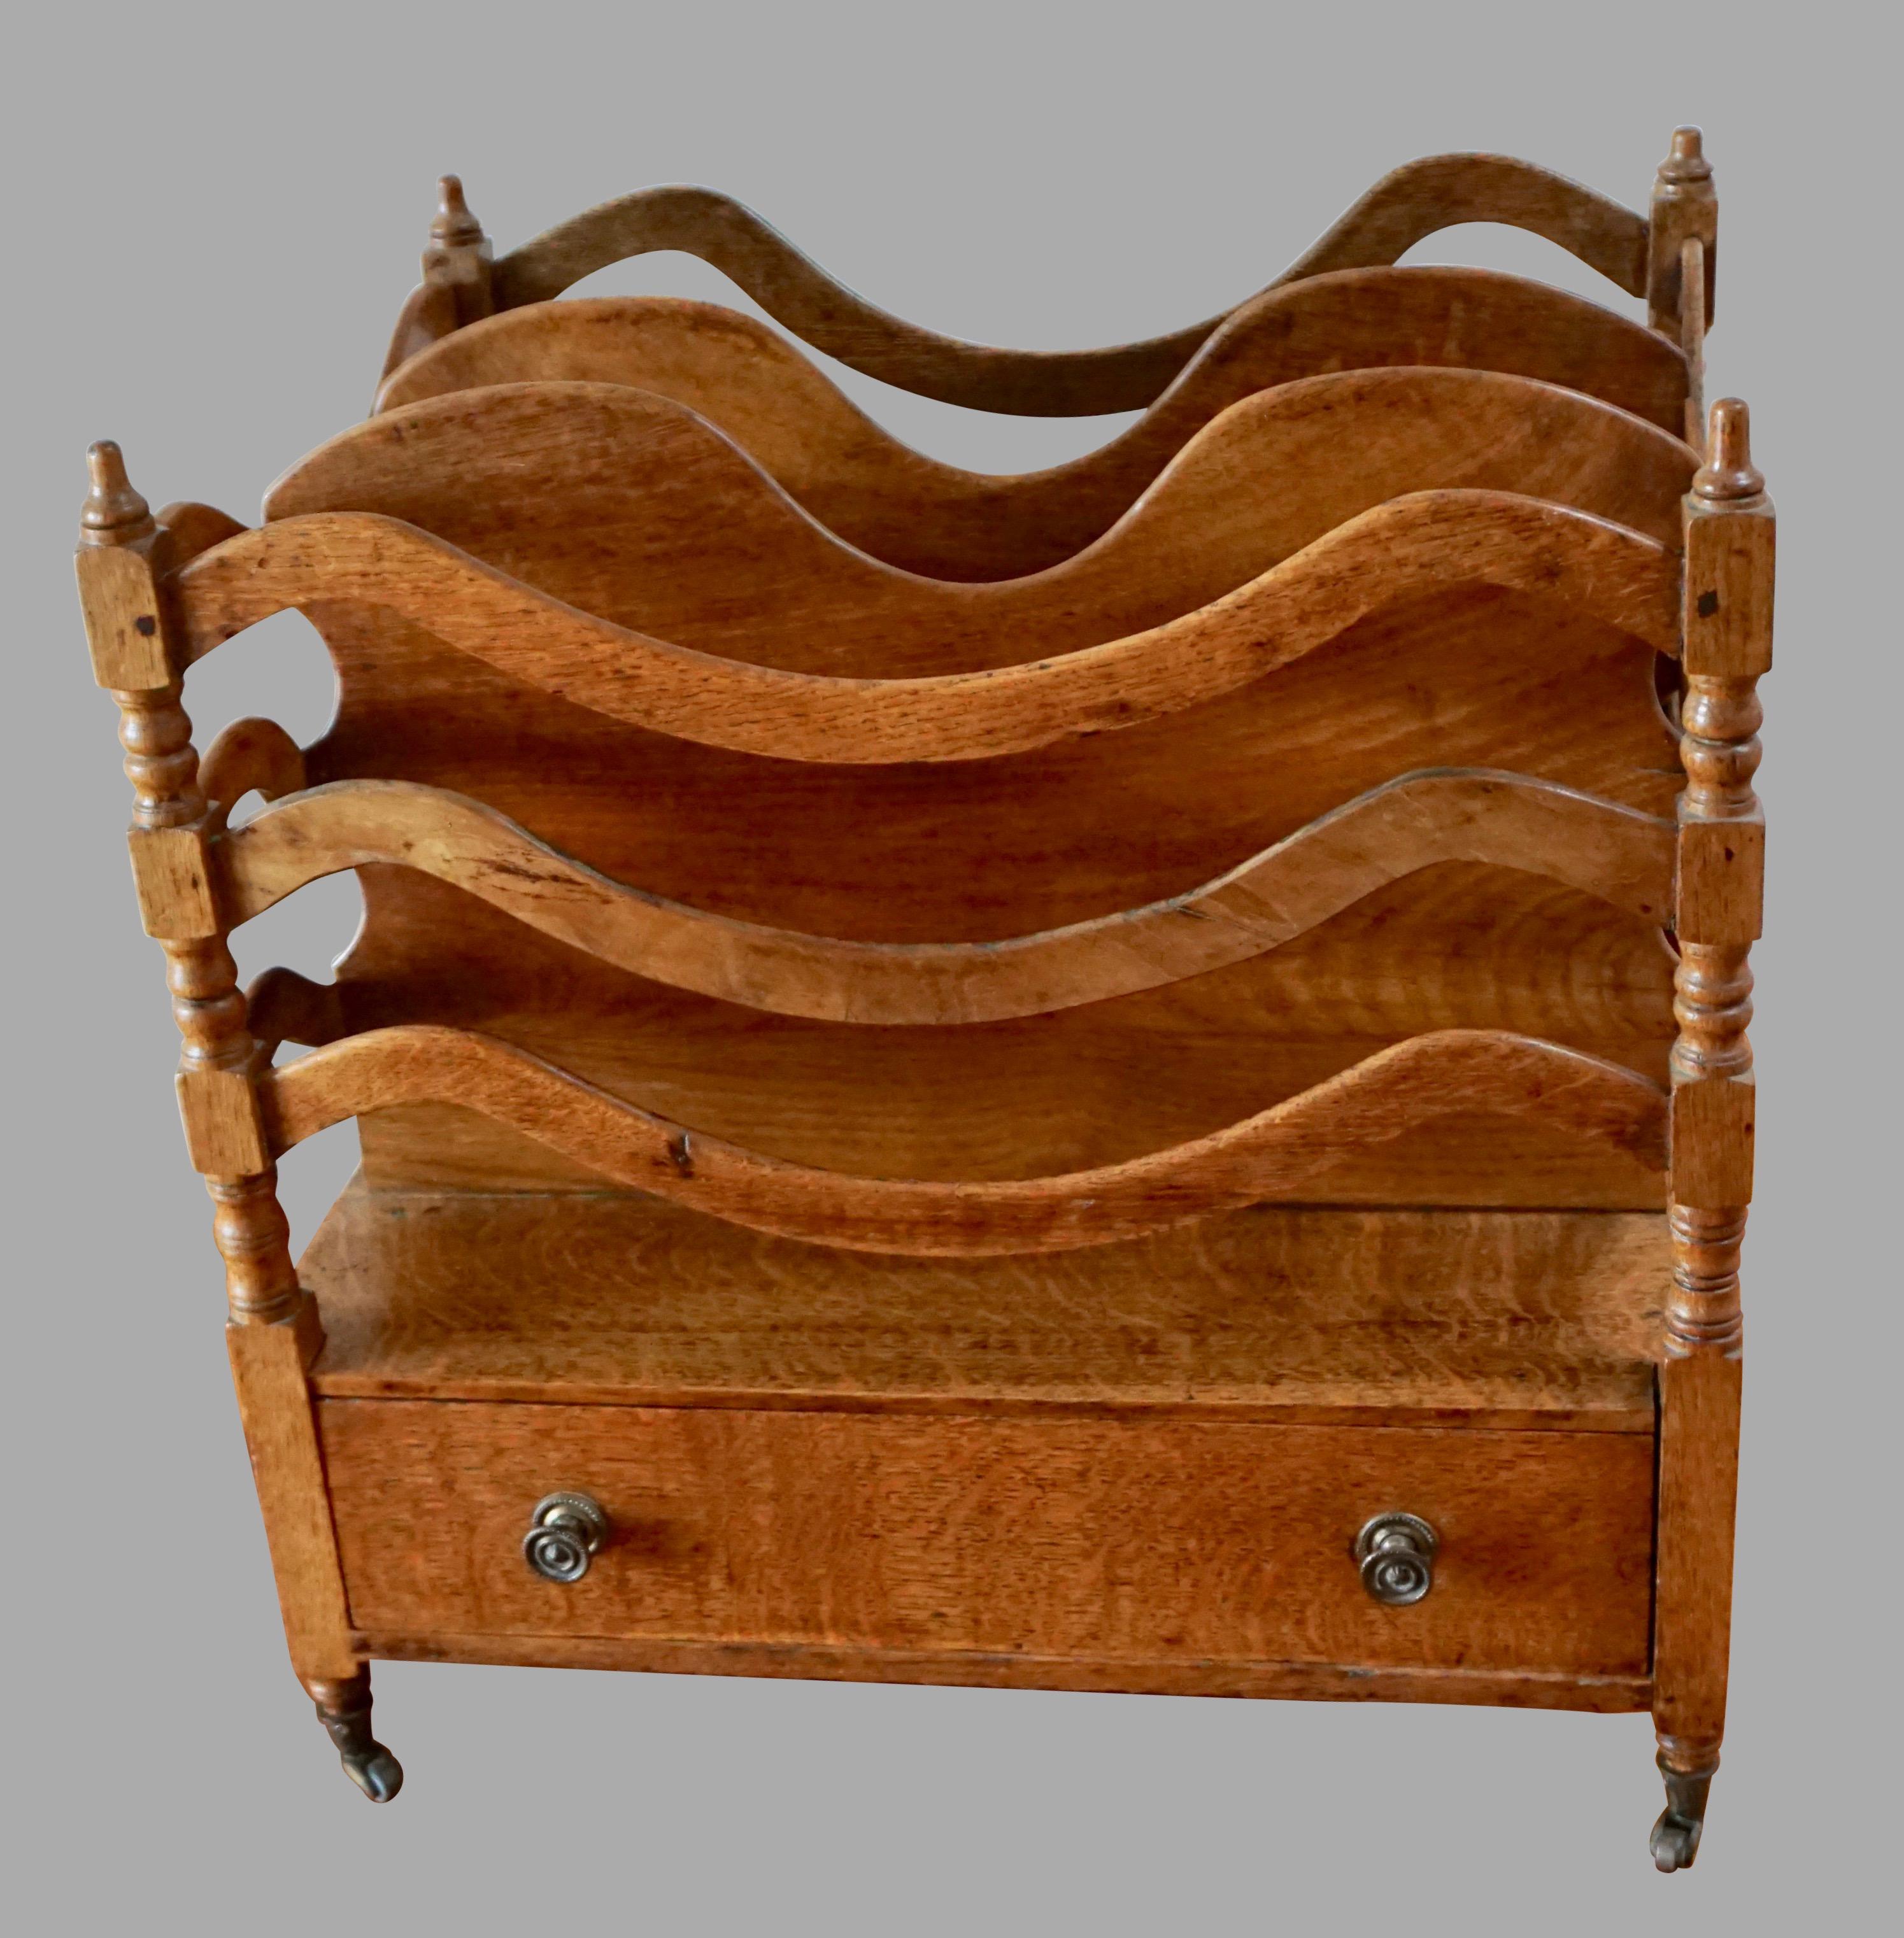 An English Regency period Canterbury of unusual undulating serpentine form, the sides and dividers above a single drawer with replaced metal knobs, all resting on short turned legs terminating in original brass casters, Circa 1800-1825.